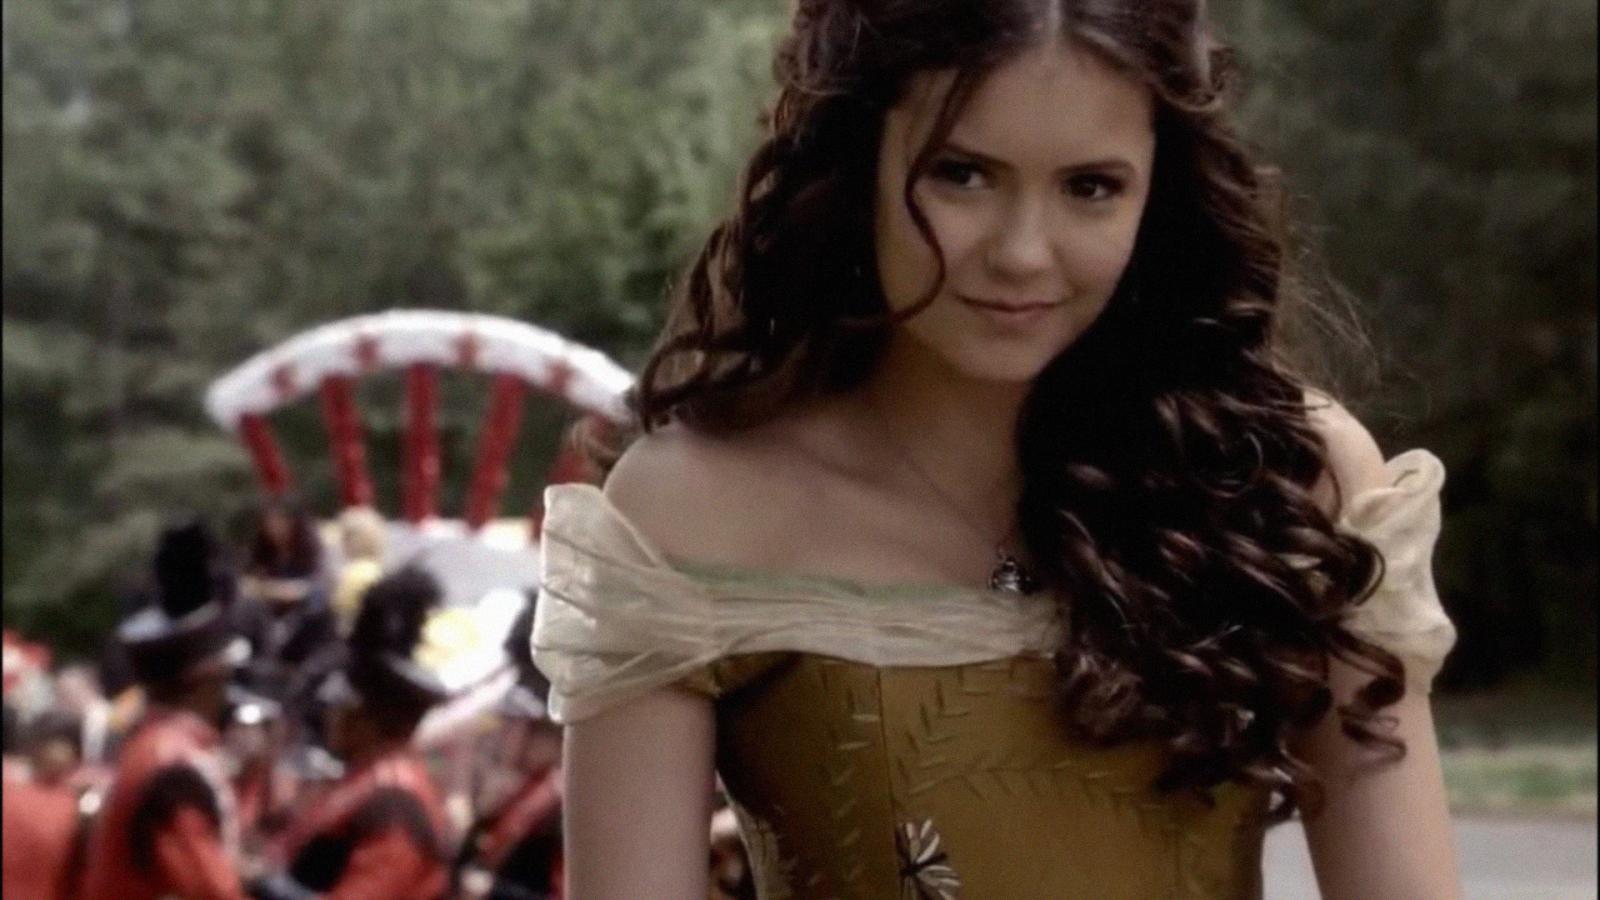 The Vampire Diaries Fans Still Can't Stand This Katherine Storyline - image 1